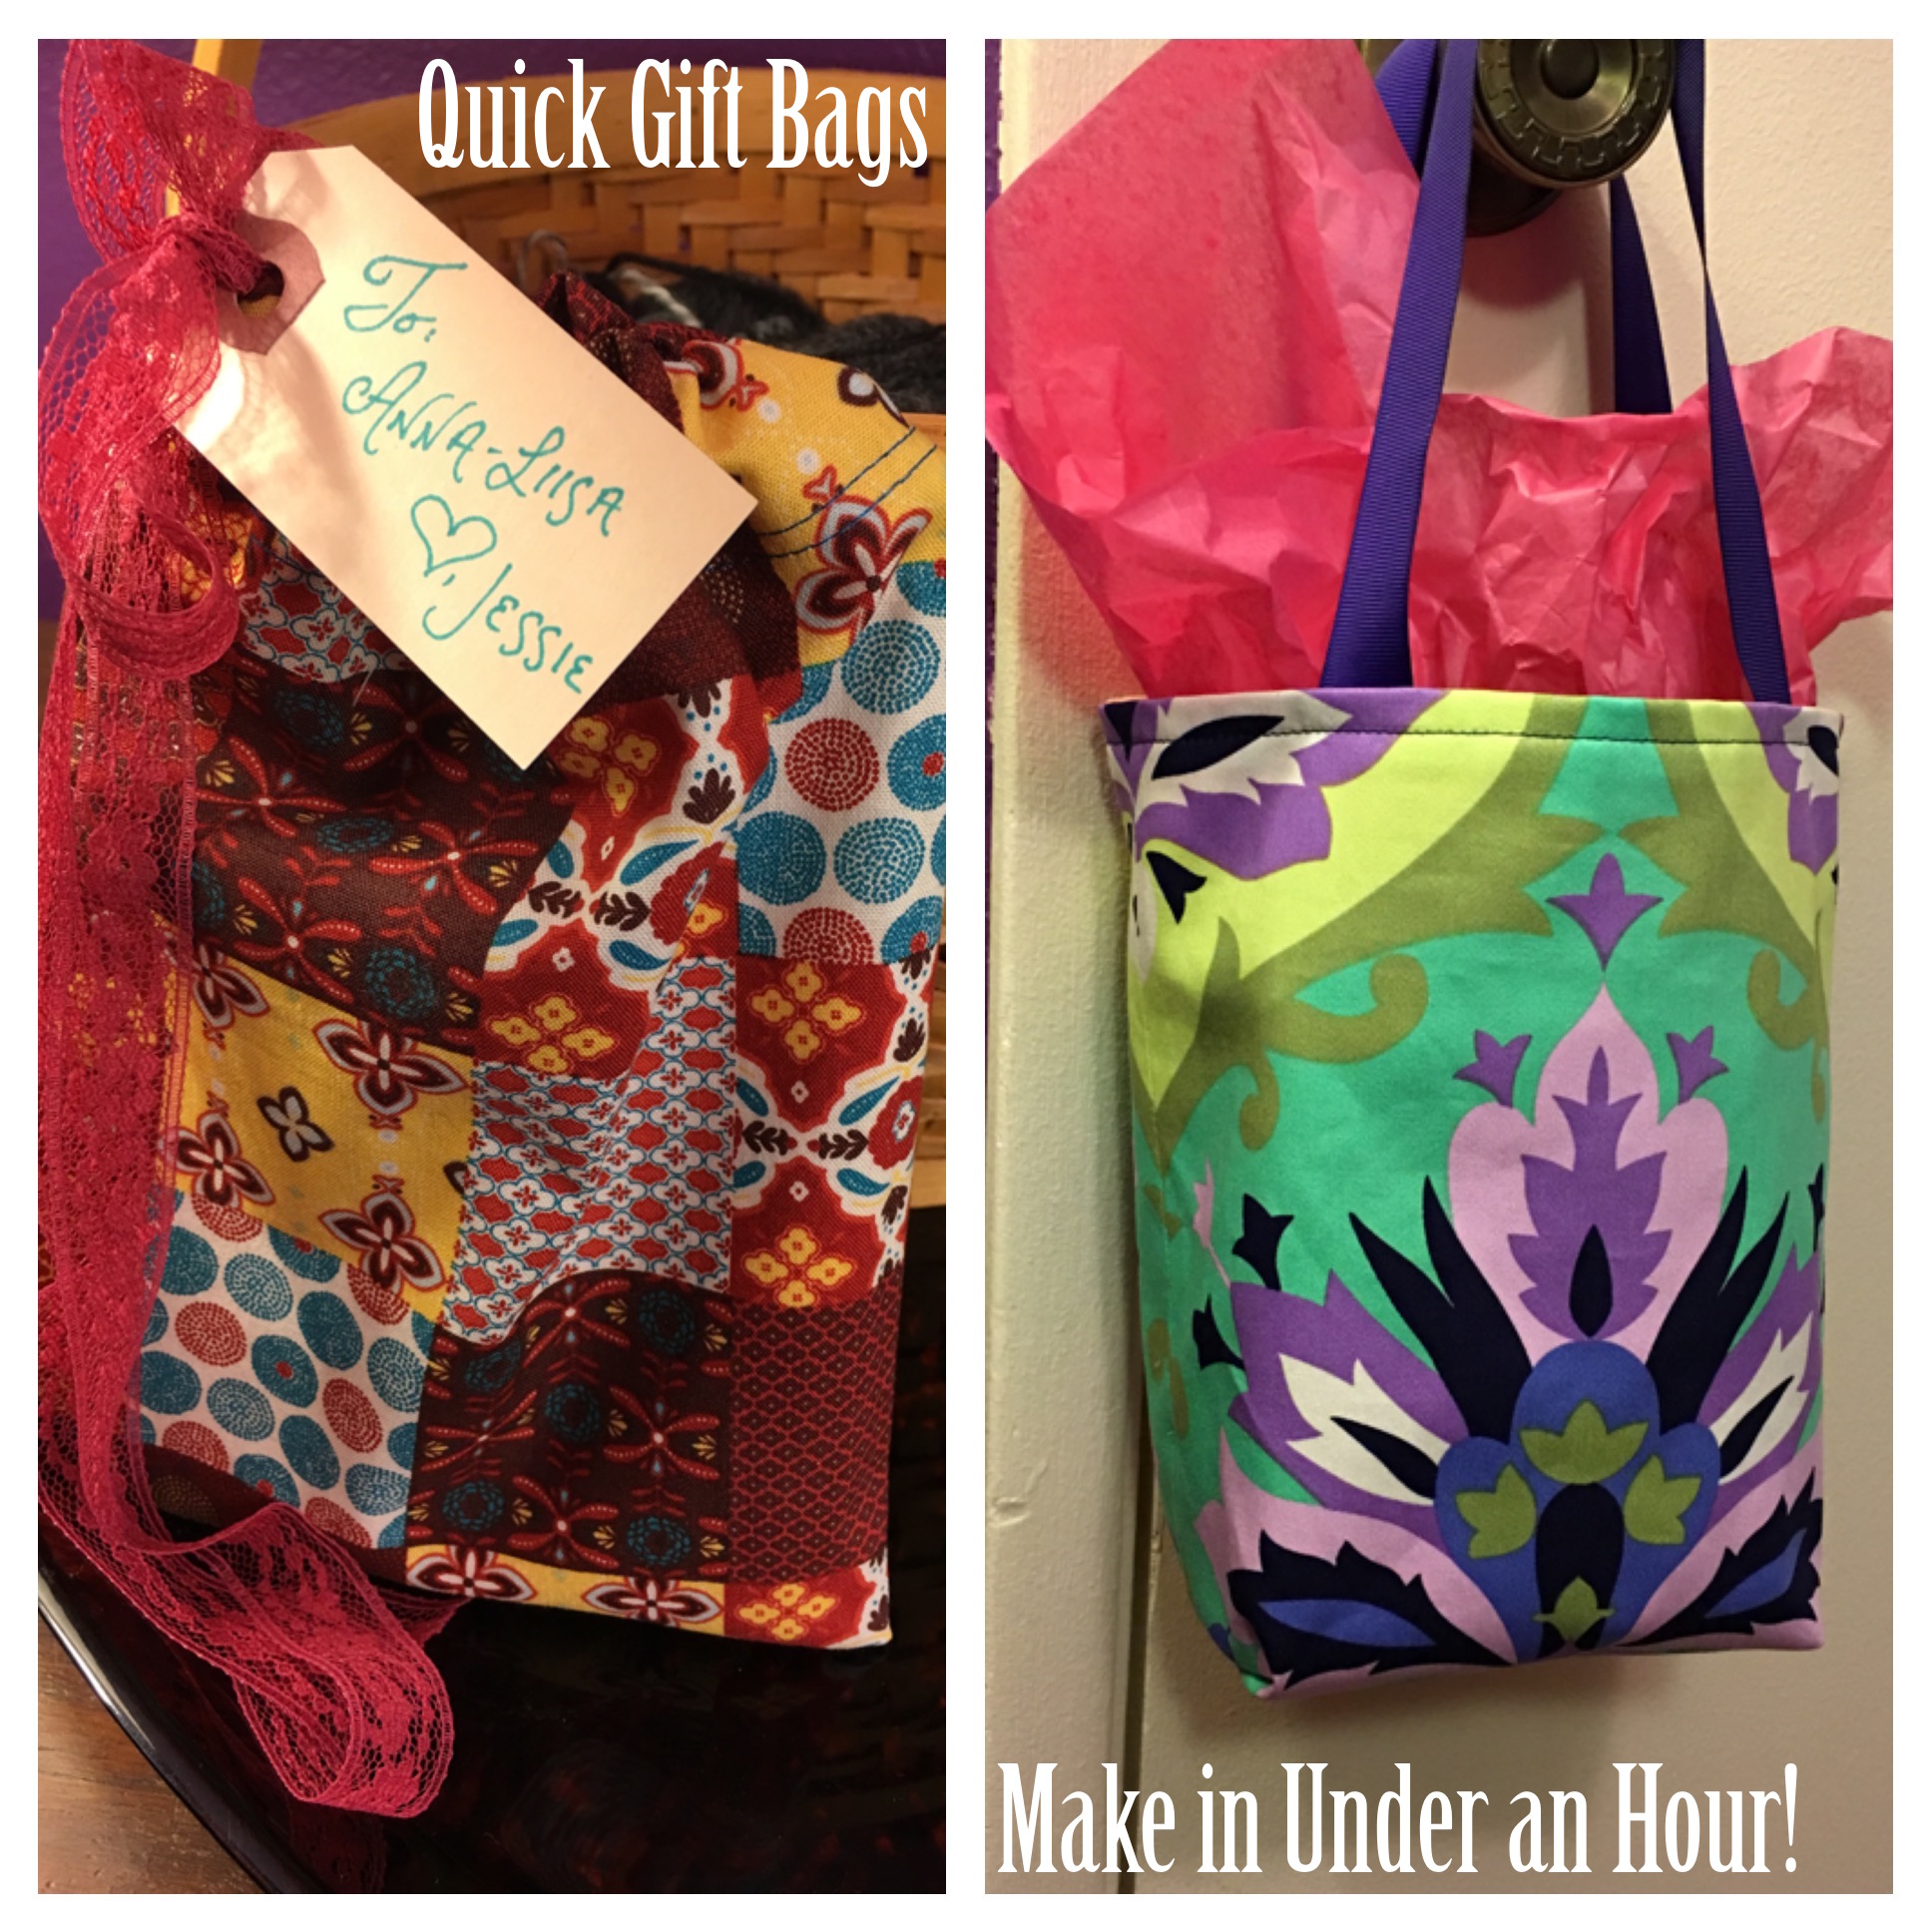 Quick gift bags